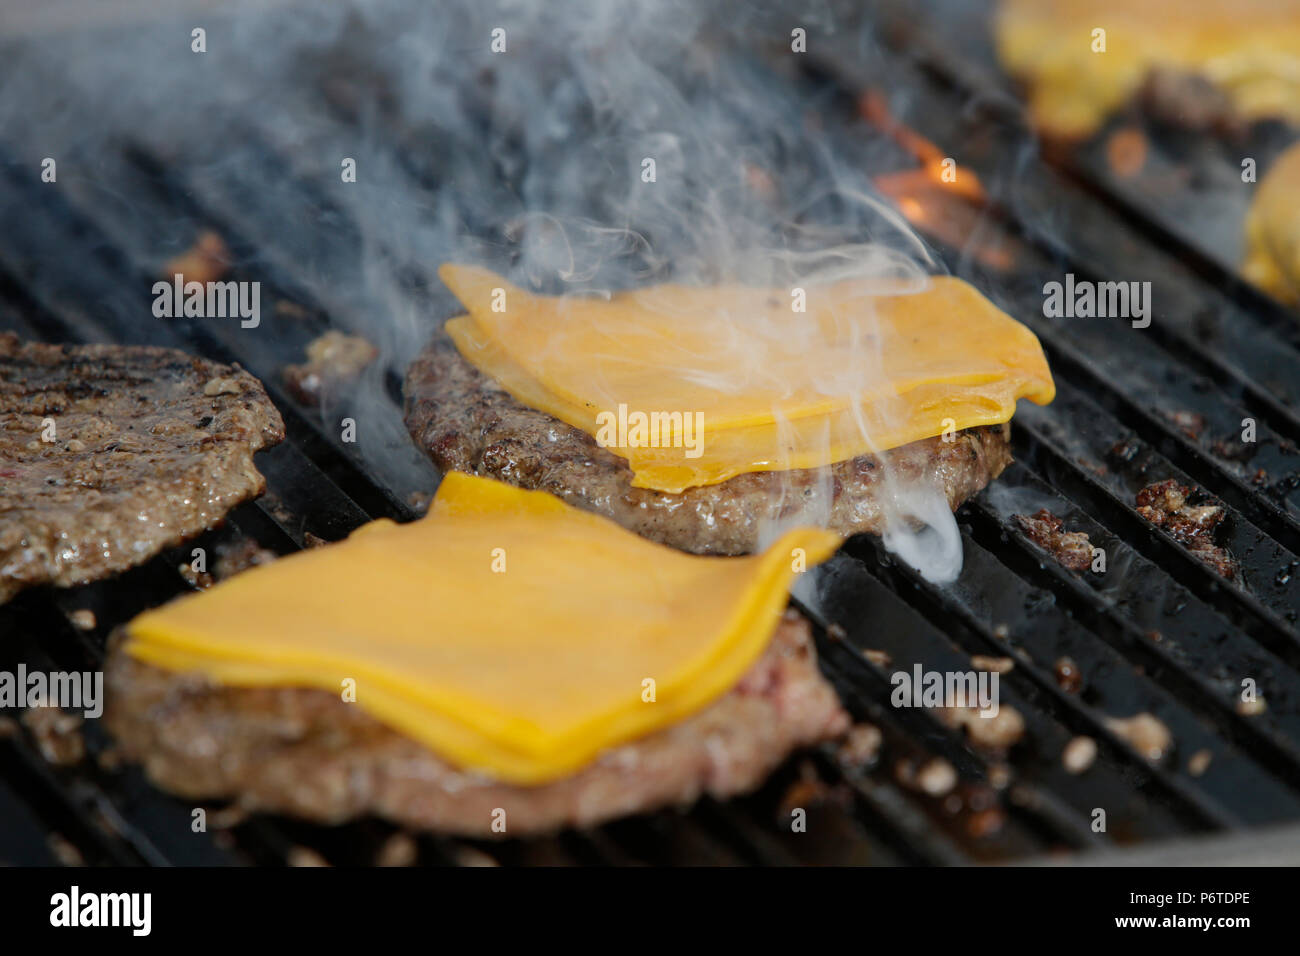 Hoppegarten, Germany, cheeseburgers are being prepared on a grill Stock Photo